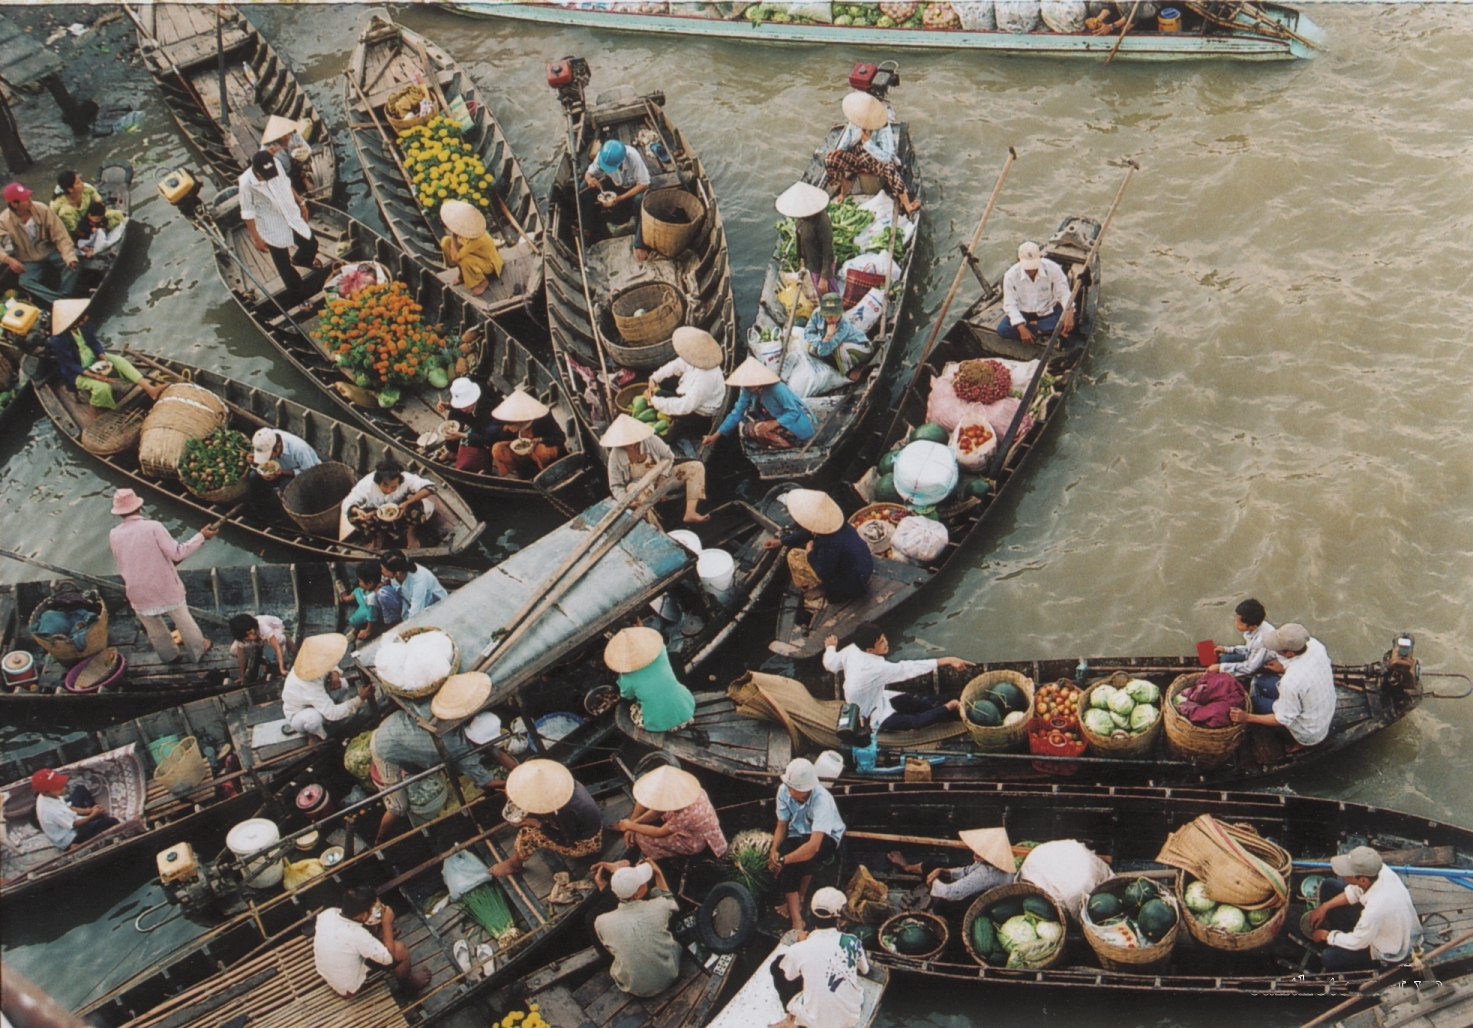 Cai Rang Floating market in Can tho